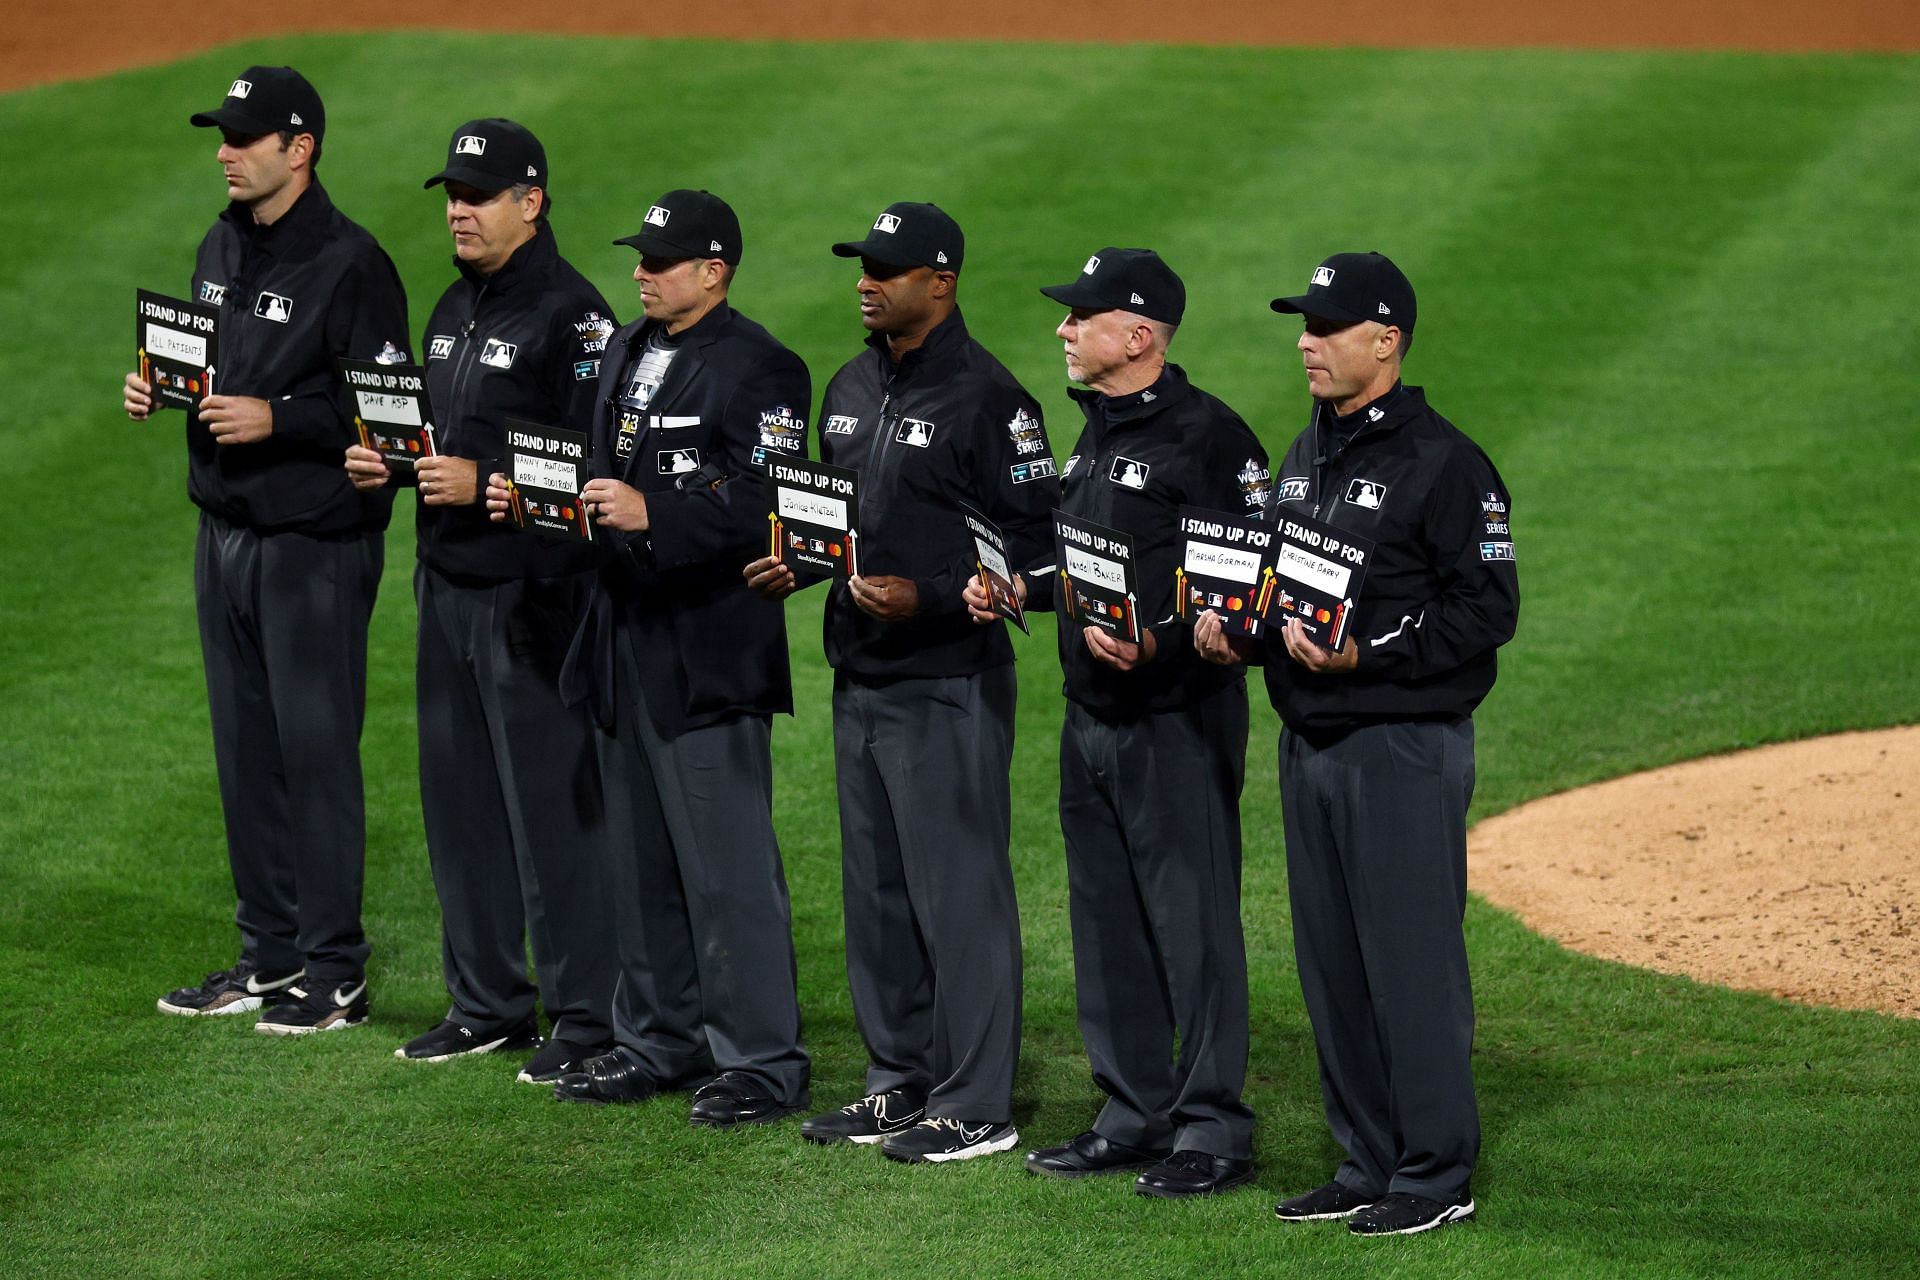 MLB umpire salary: How much does an MLB umpire get paid for a season?